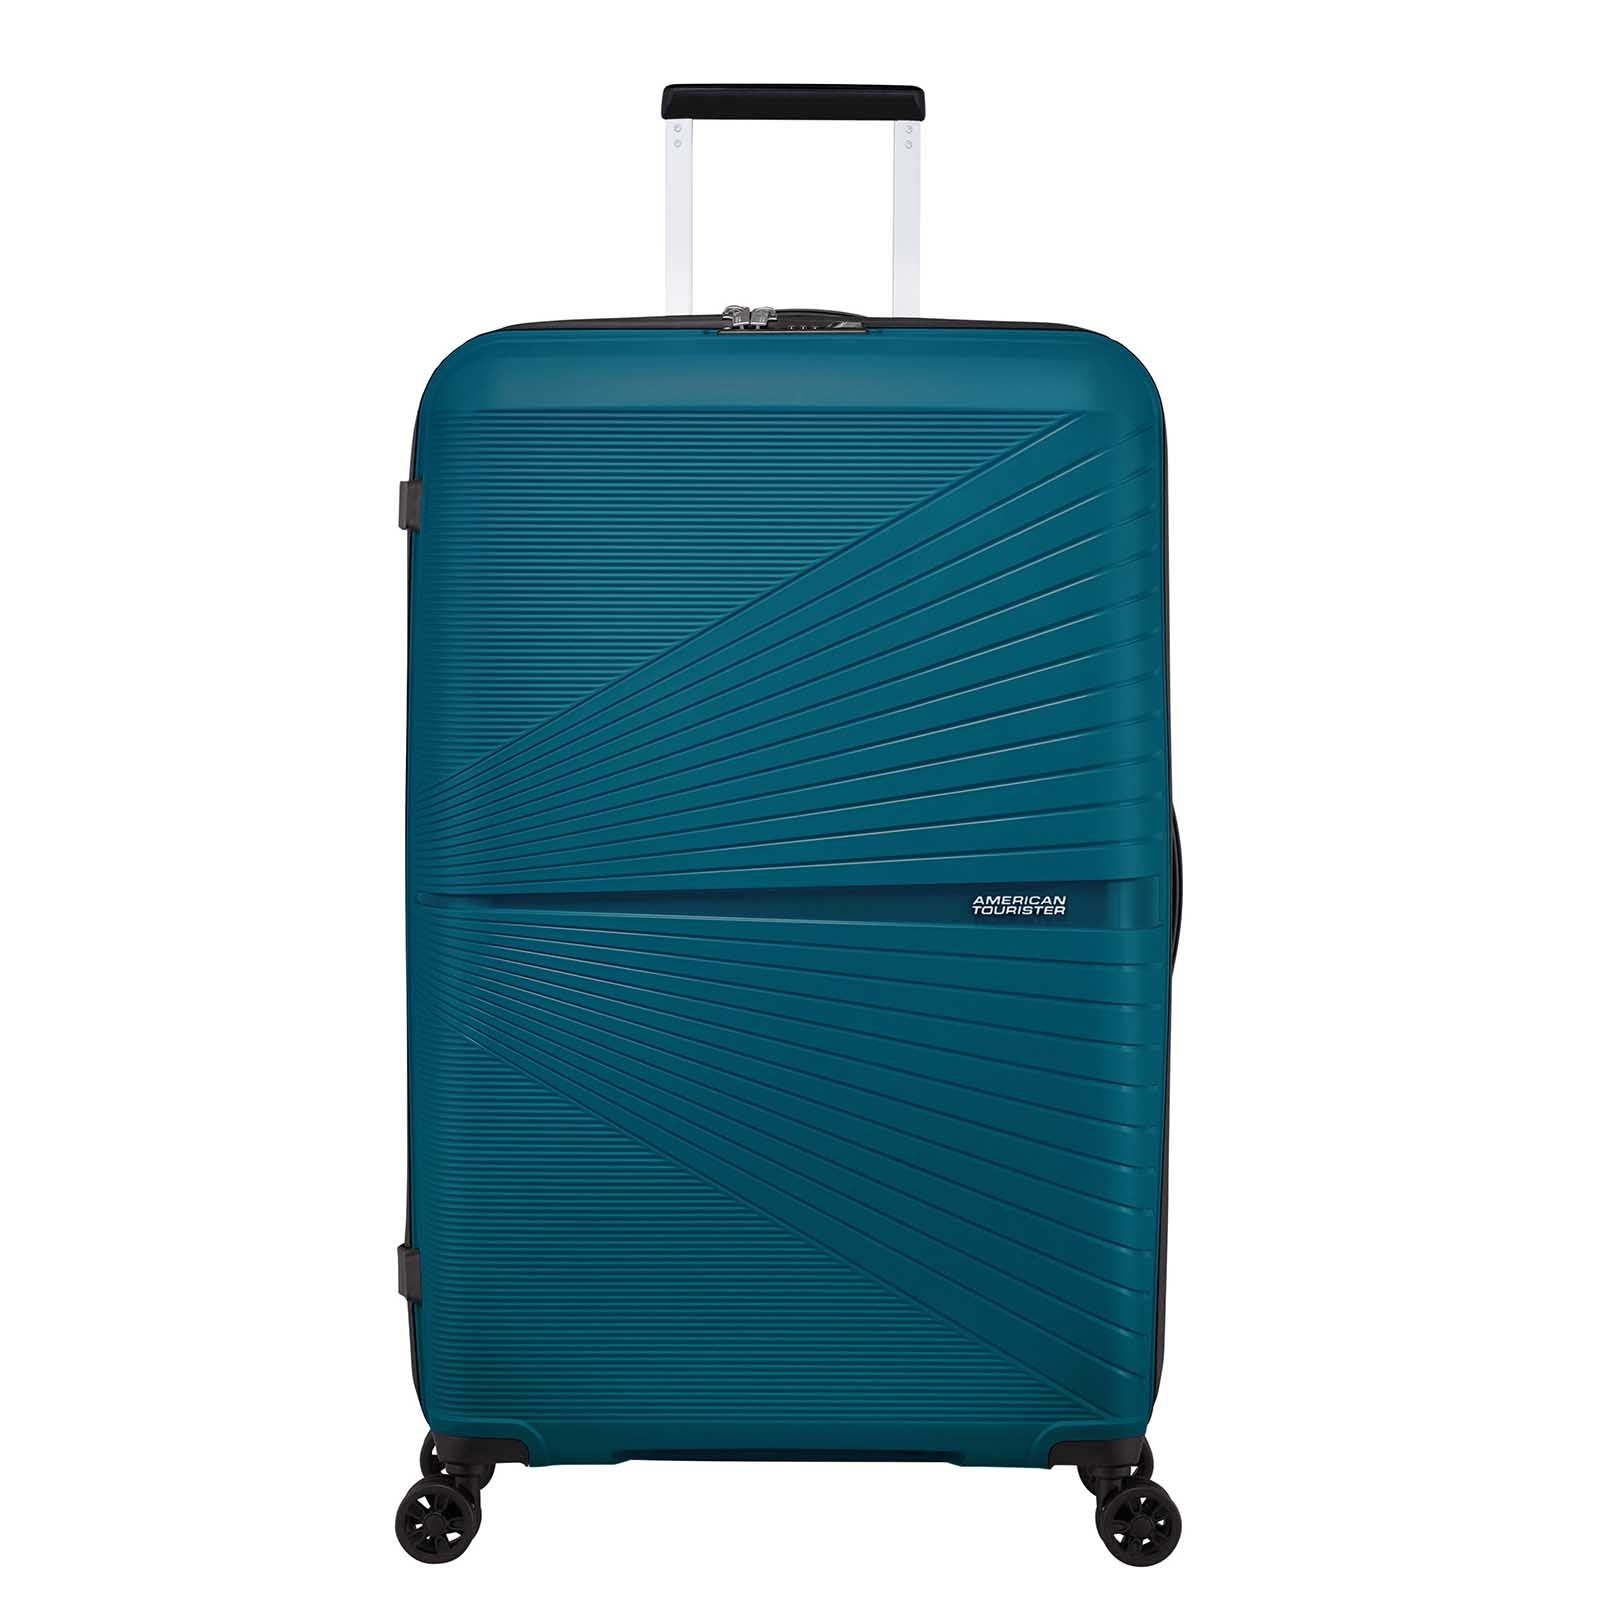 American-Tourister-Airconic-77cm-Suitcase-Deep-Ocean-Front